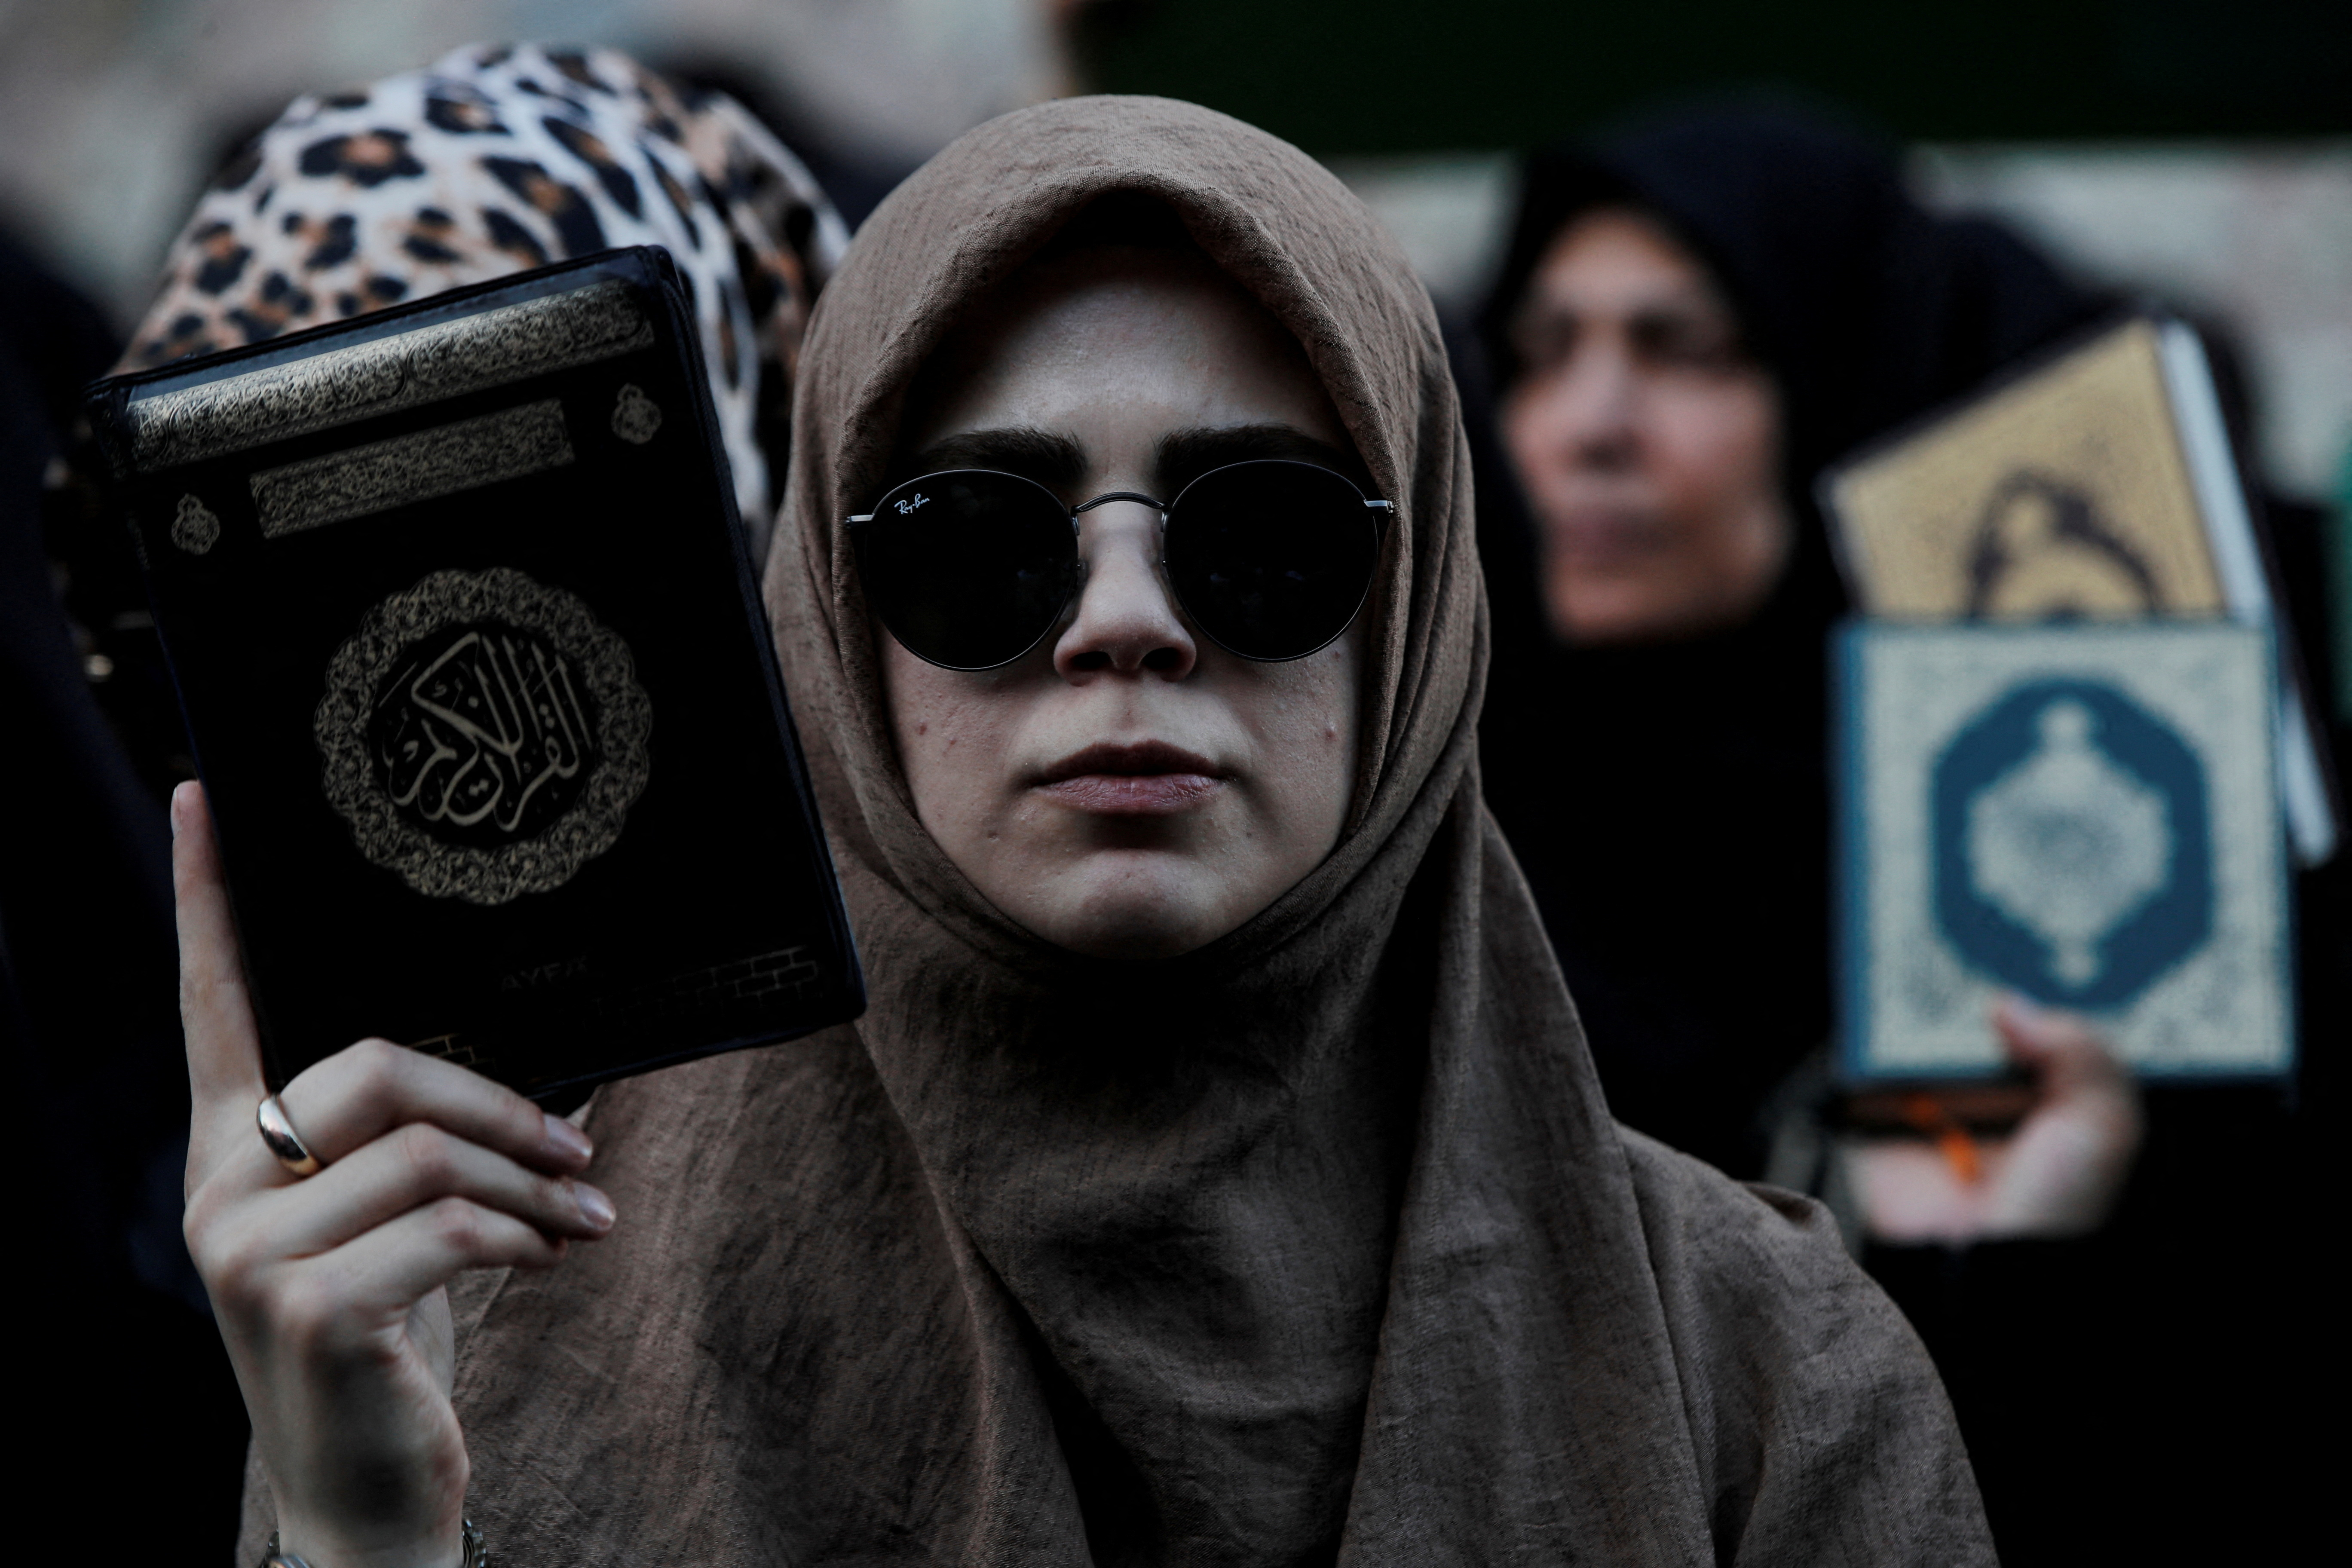 Protesters hold copies of the Koran as they demonstrate outside the Consulate General of Sweden in Istanbul